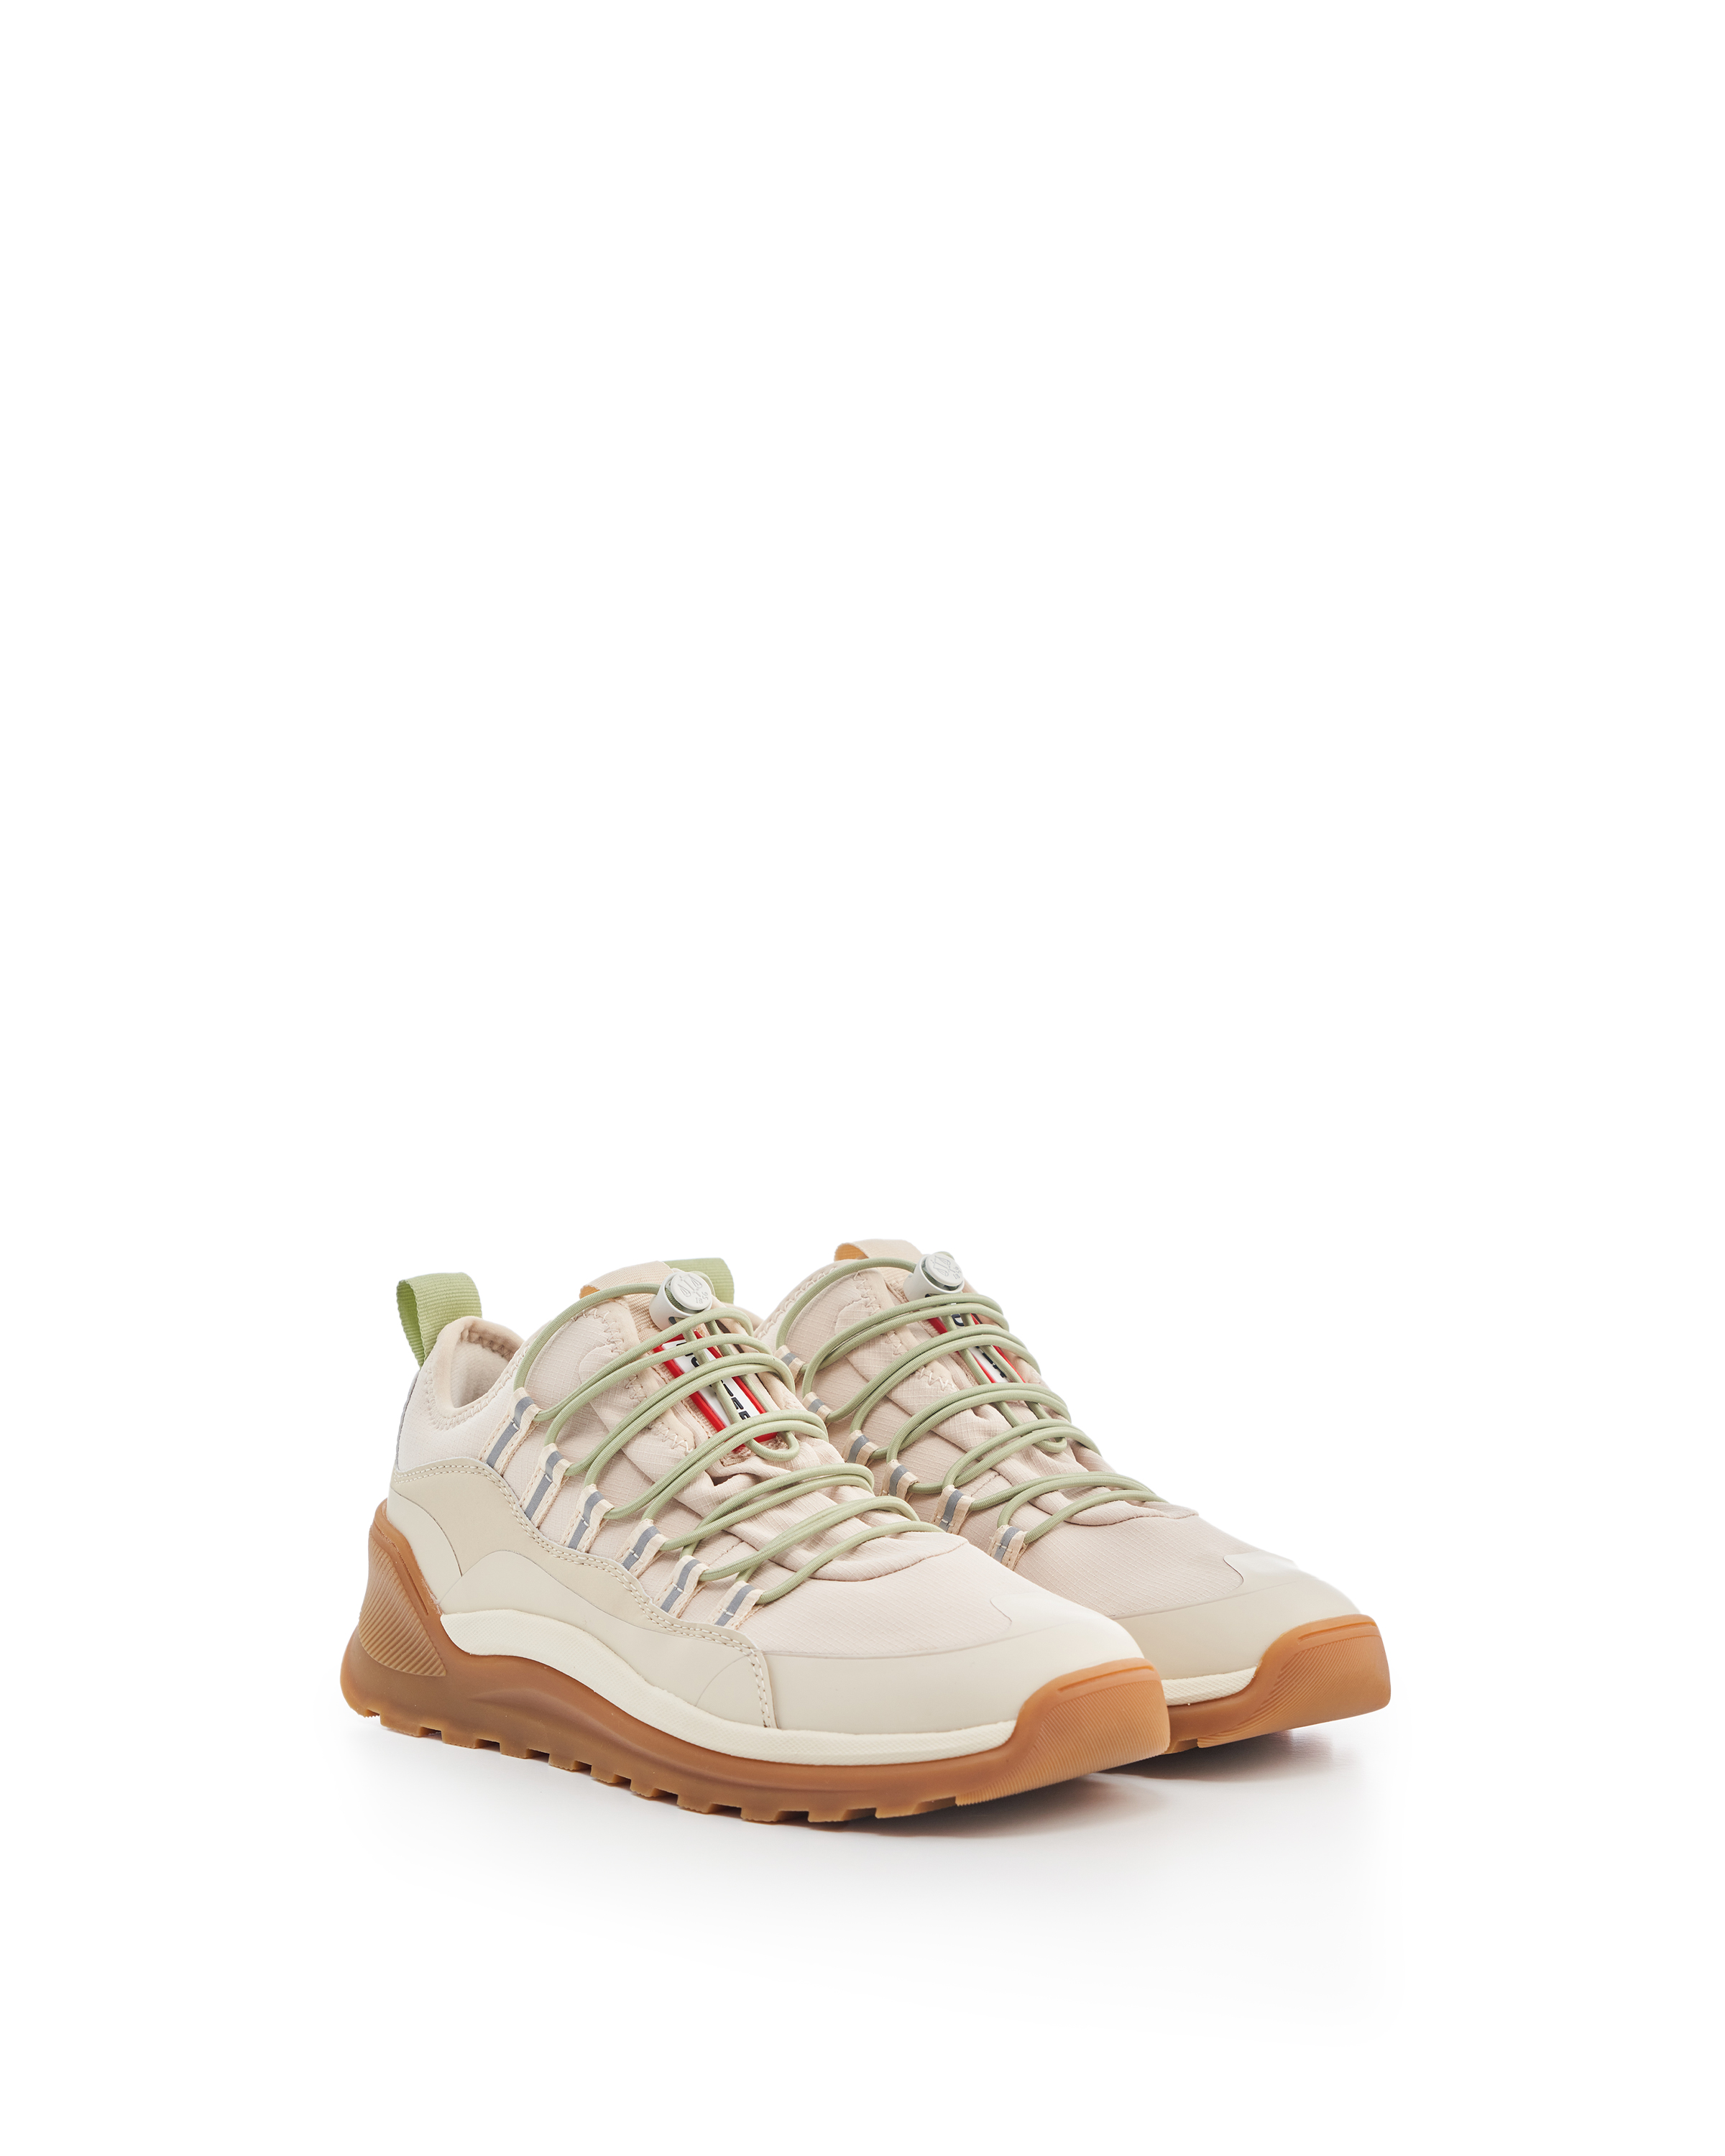 WOMENS TRAVEL MID TRAINER